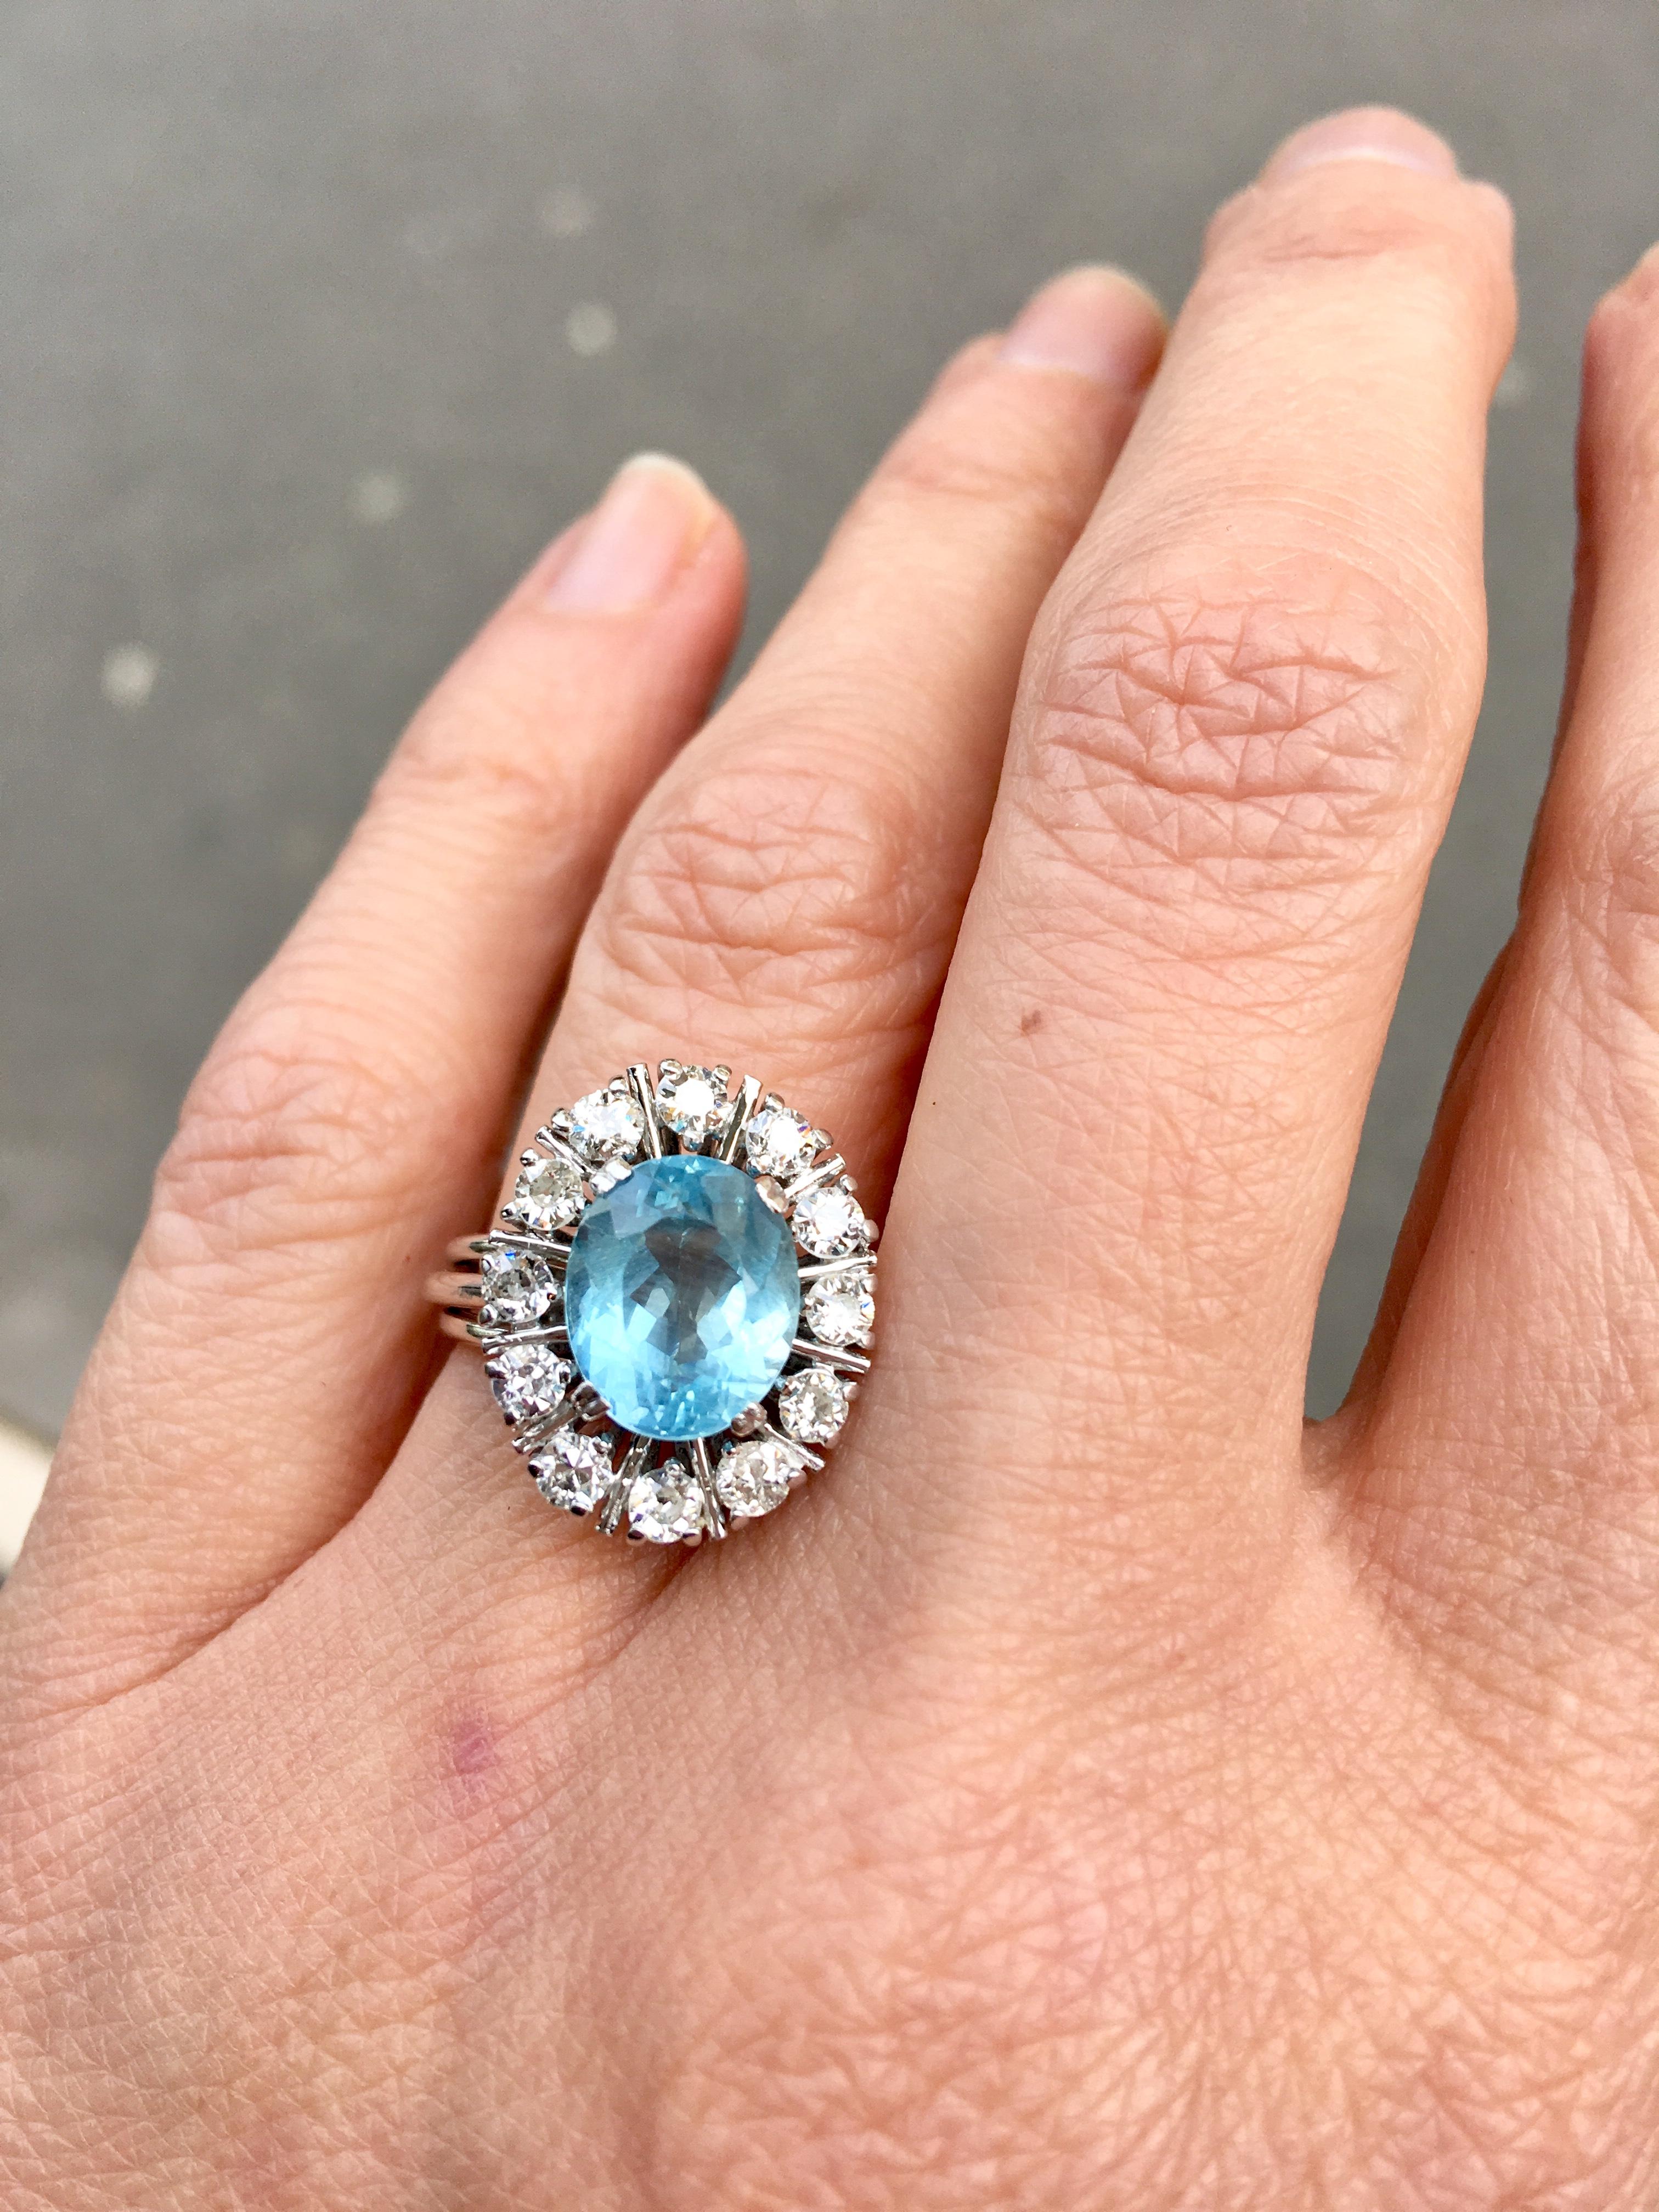 1970’s Daisy shape 2,85 carats Brazilian aquamarine and diamonds cluster engagement ring !

The beautiful Aquamarine is 2.85 carats surrounded by a halo of 12 brilliant old cut Diamonds making a grand total of 0.60ct of Diamonds. 
Aquamarine